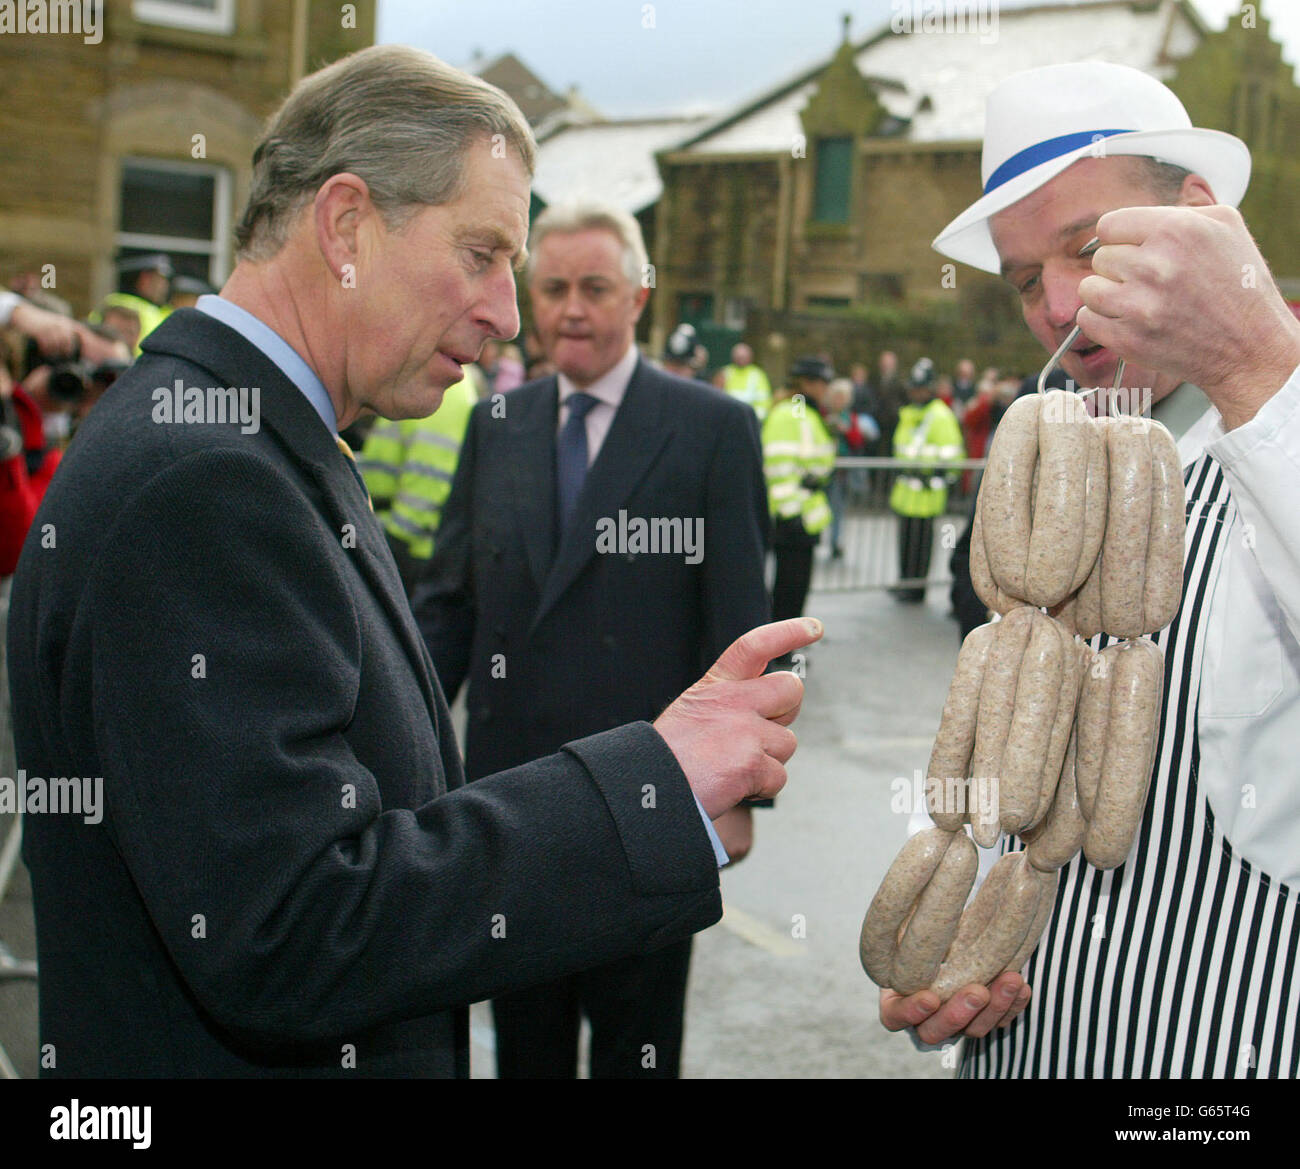 The Prince of Wales is presented with a string of local sausages by butcher Cliff Cowburn during a visit to Clitheroe in Lancs. Later, he travelled to Chipping on a new rural bus route during a day long visit to the county. * He chatted to passengers on the 29-seater vehicle during the 20-minute journey through picturesque landscape which is said to have been the inspiration for JRR Tolkien's Middle Earth. The Bowland Transit project, which begins operating in April, aims to improve transport services for residents in small rural communities. Stock Photo